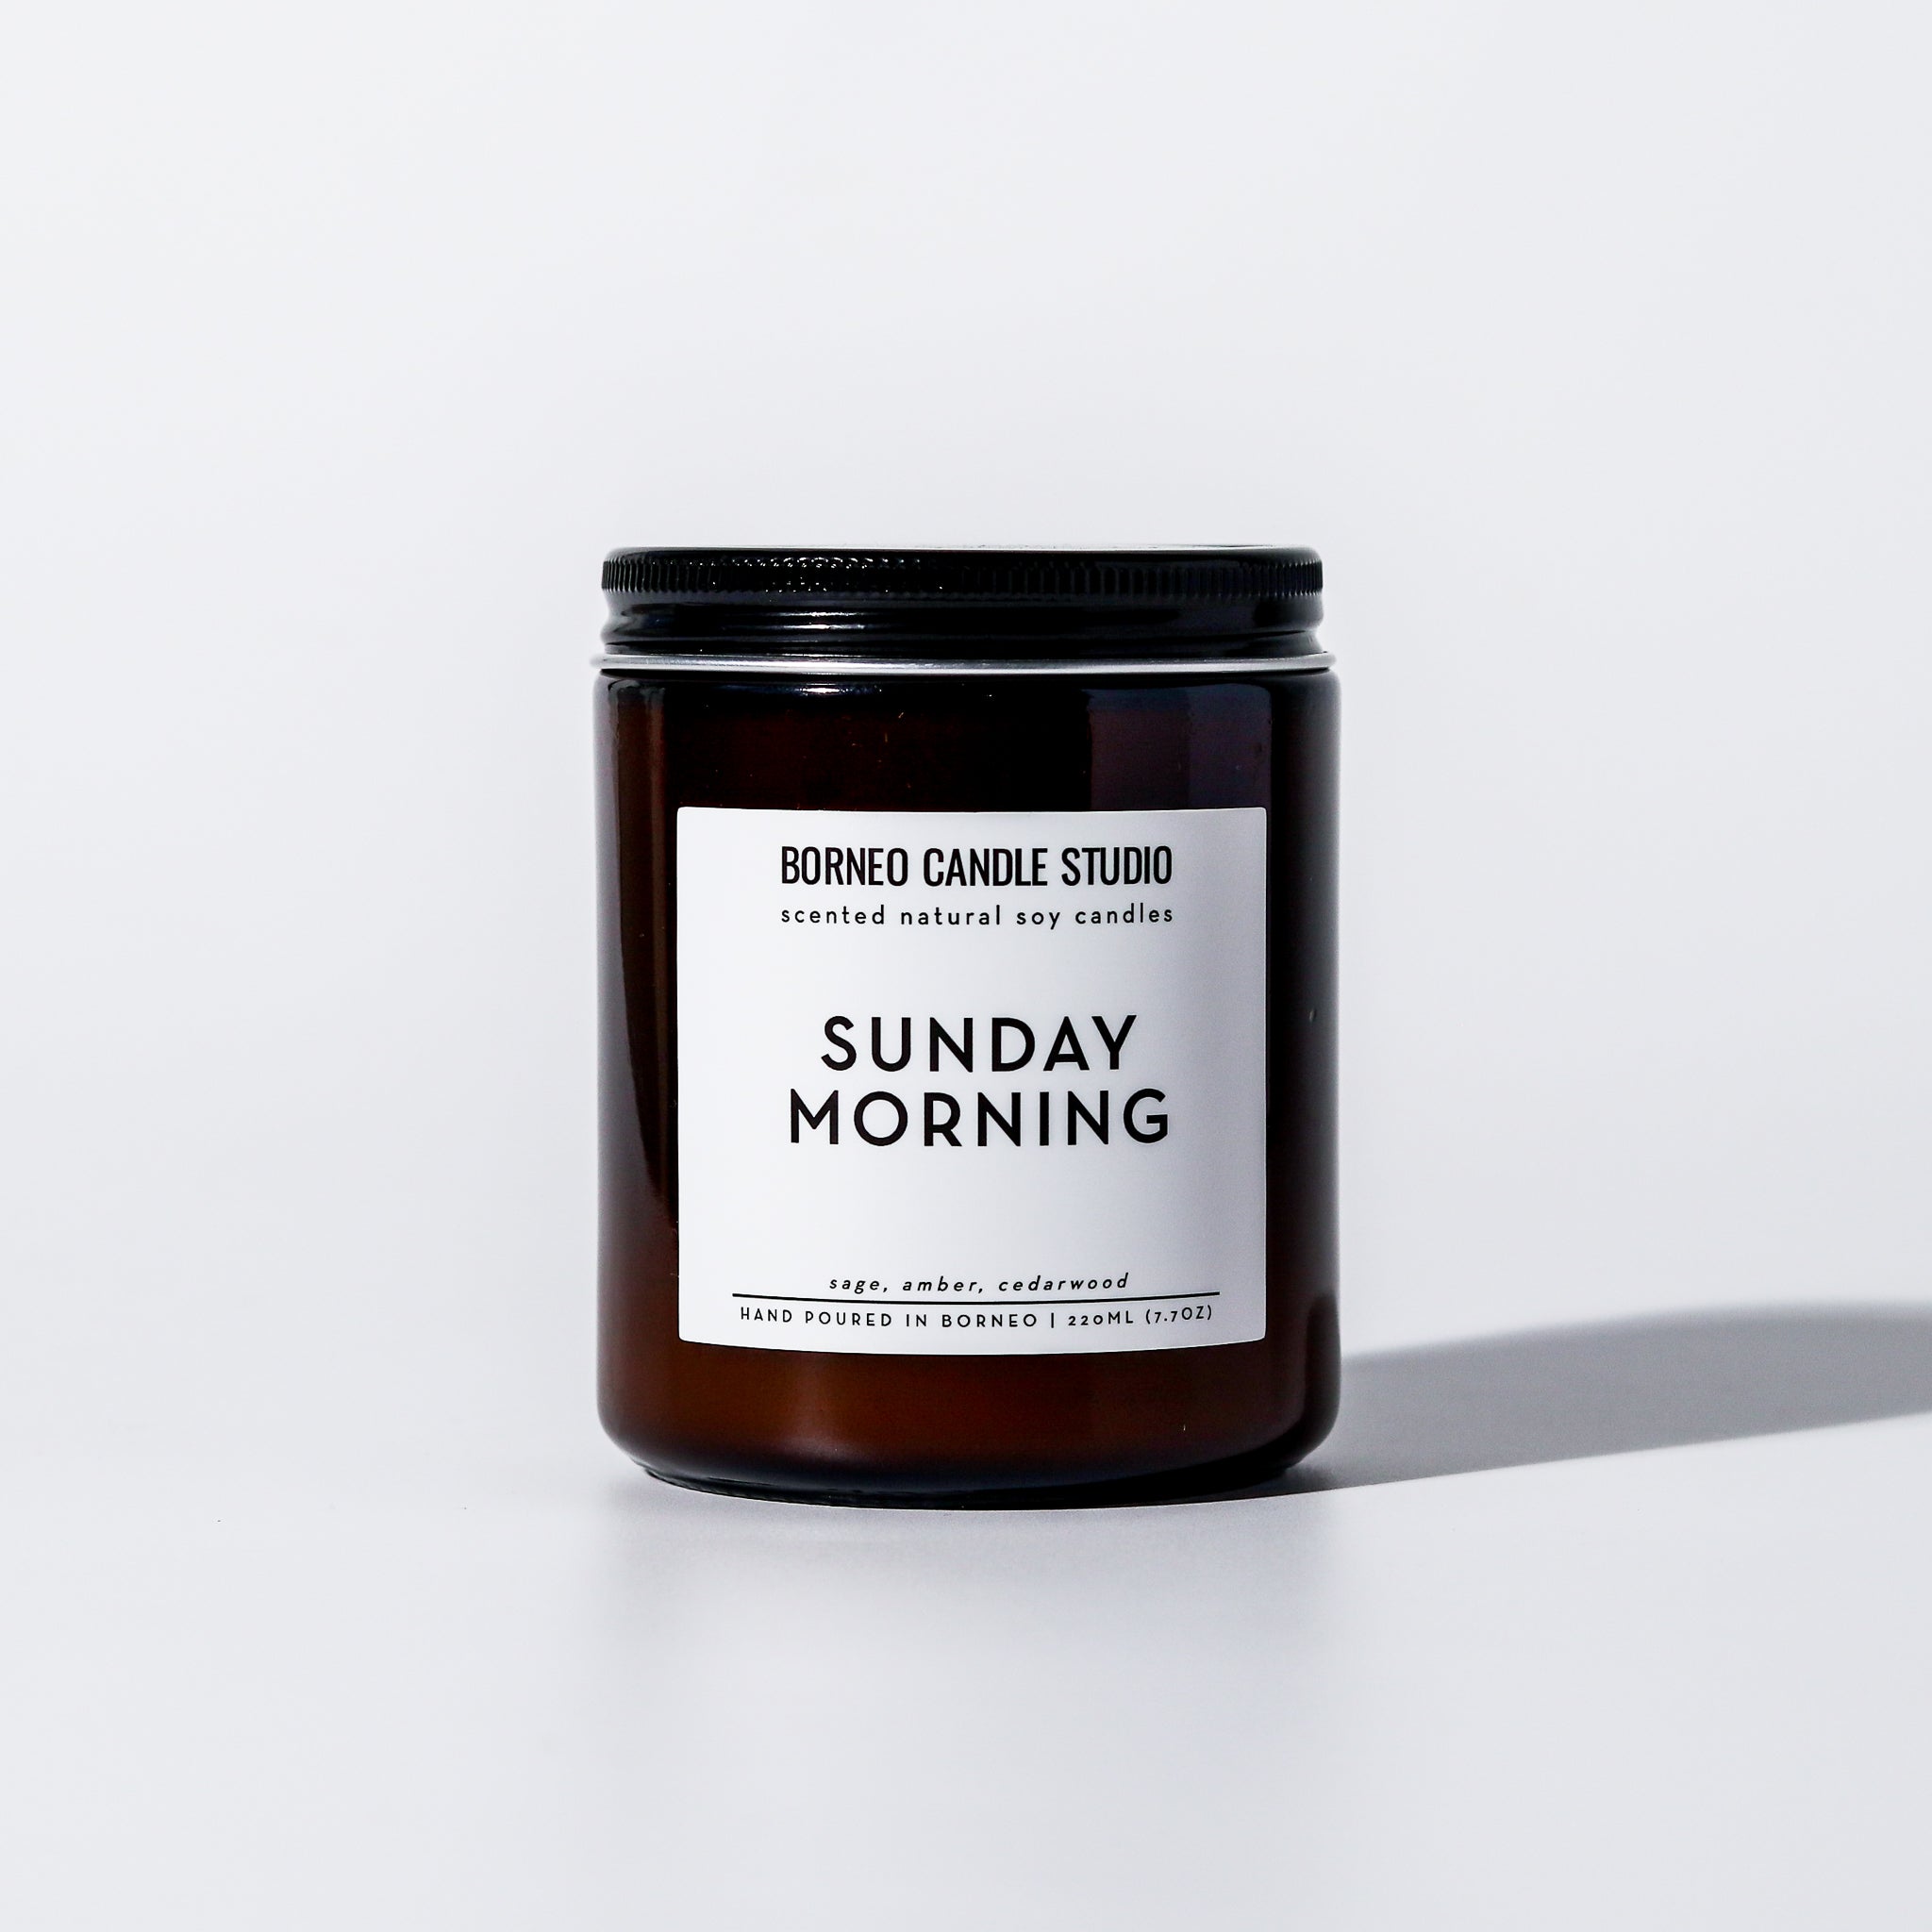 Sunday Morning soy candle with sage, amber, and cedarwood scented candle